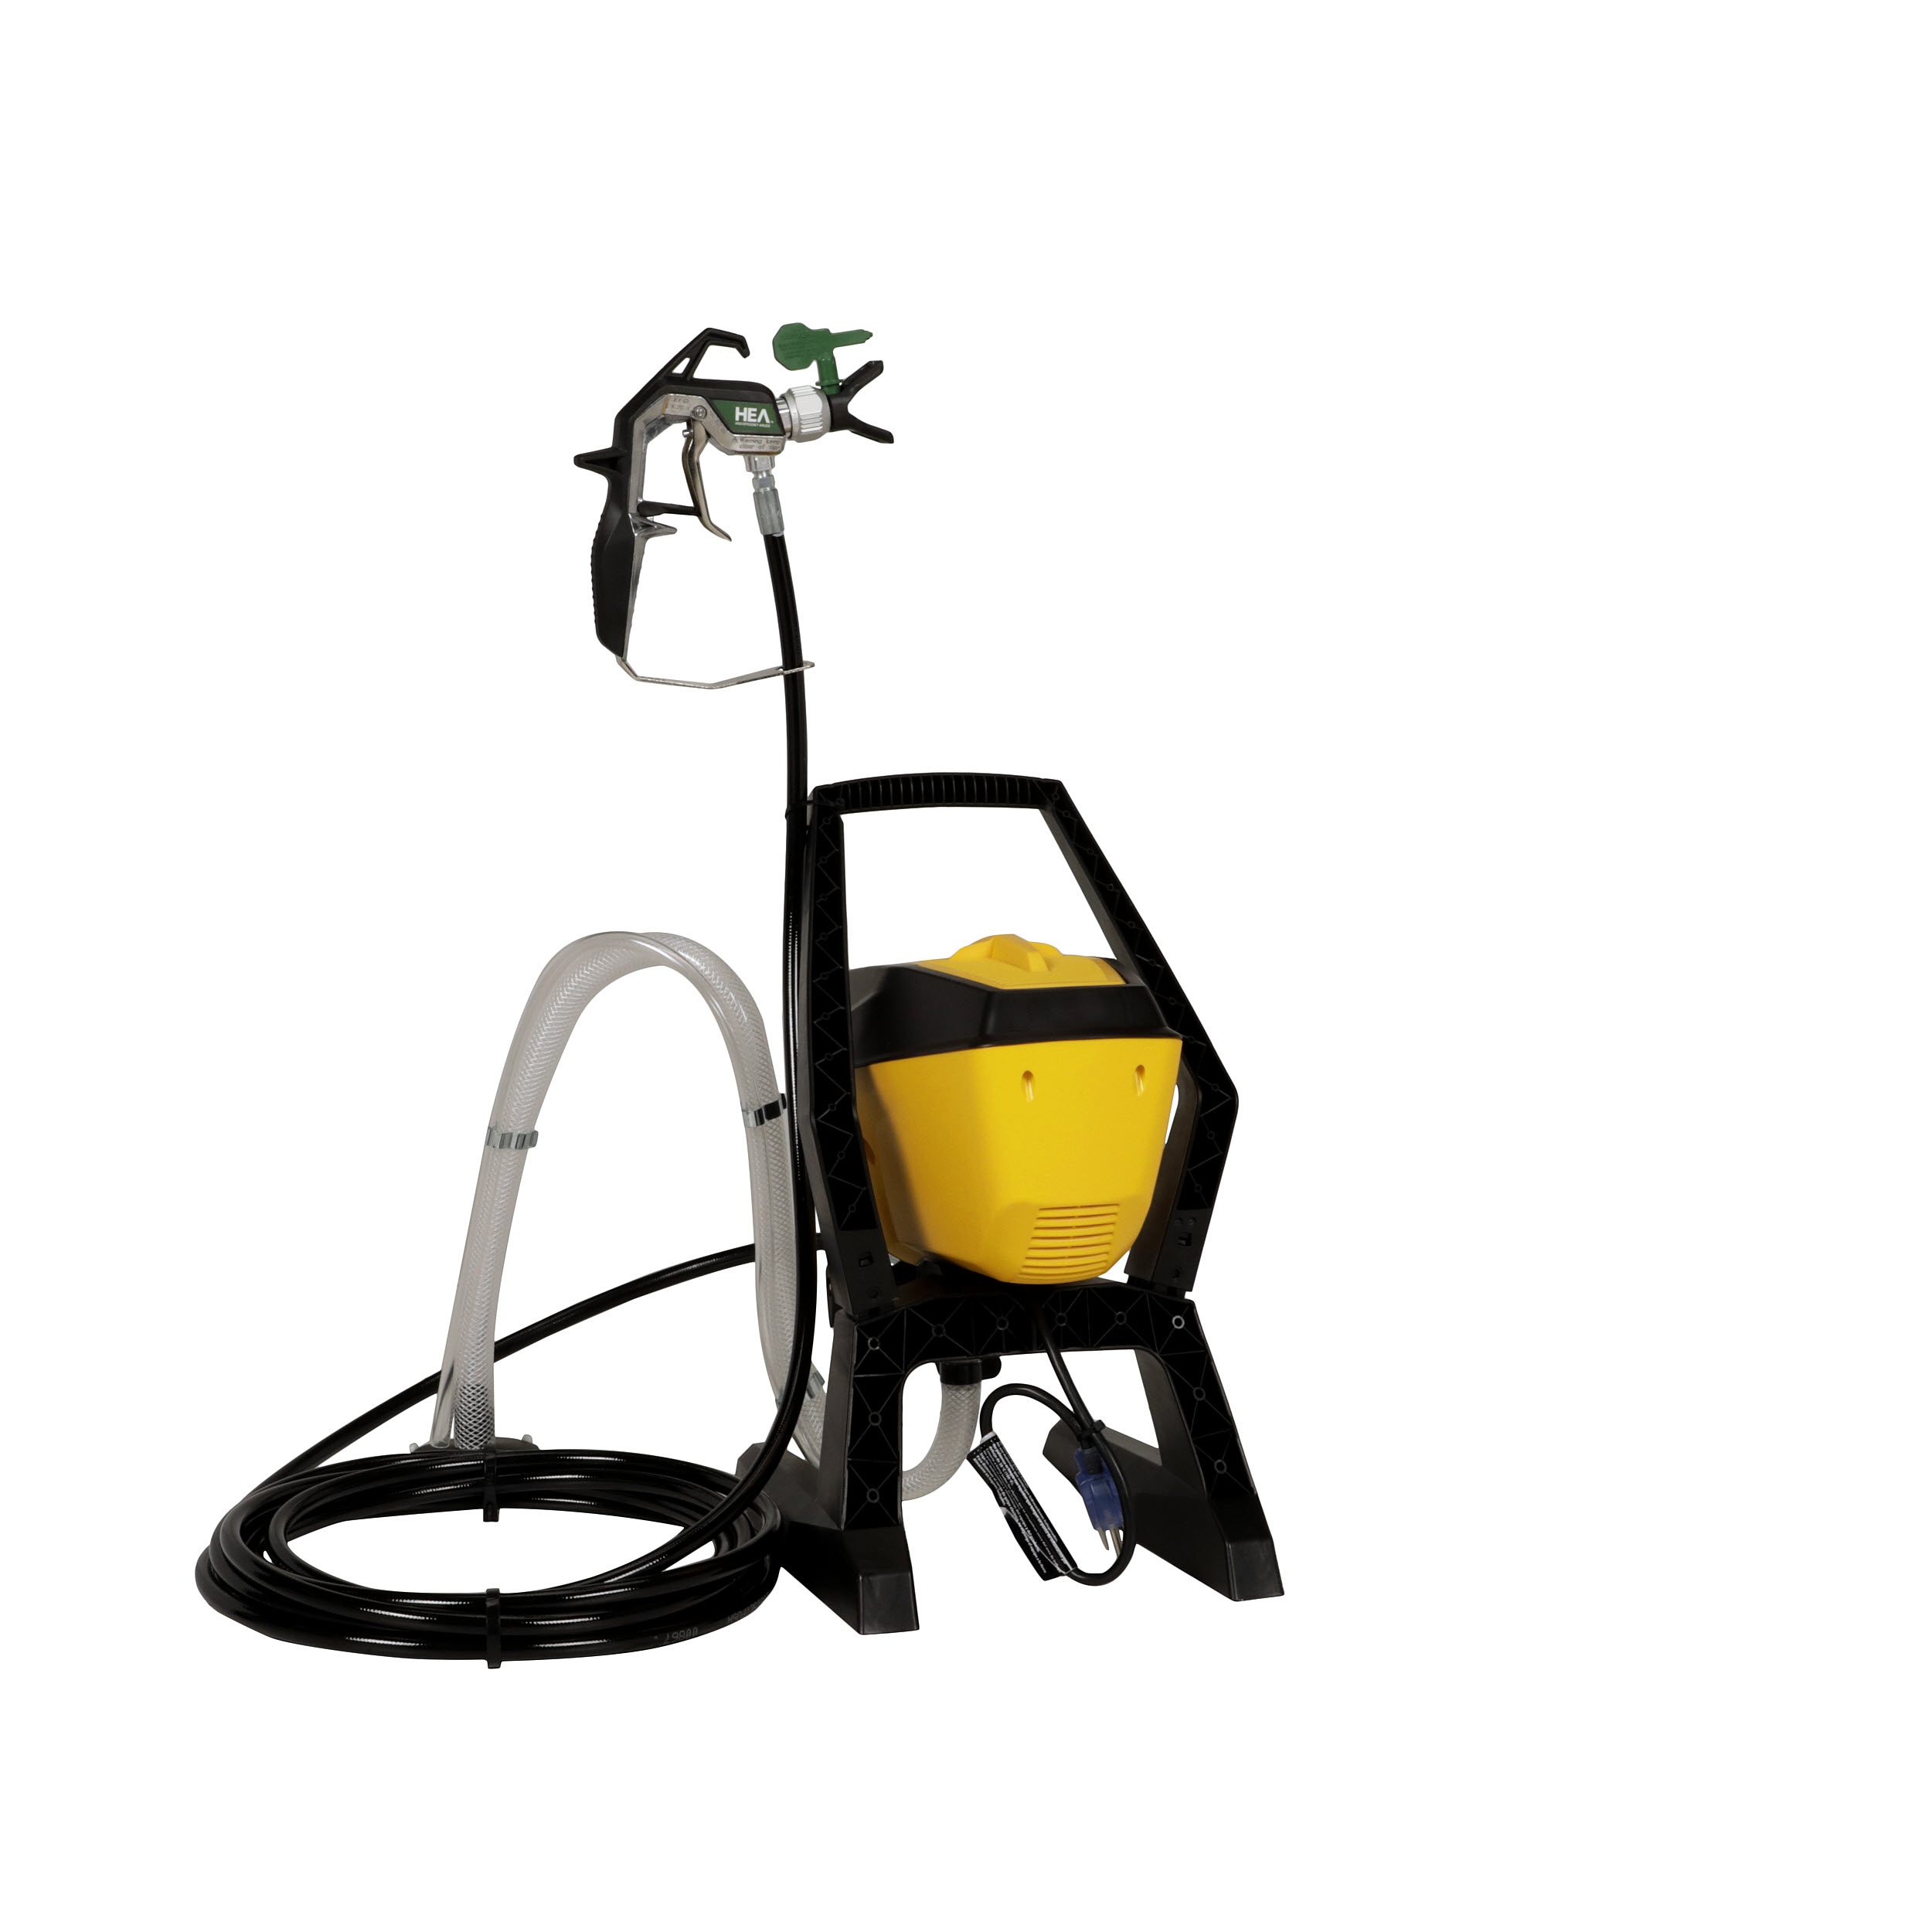 Wagner Overspray High 150 with Paint Airless Control Pro Efficiency Low Sprayer,